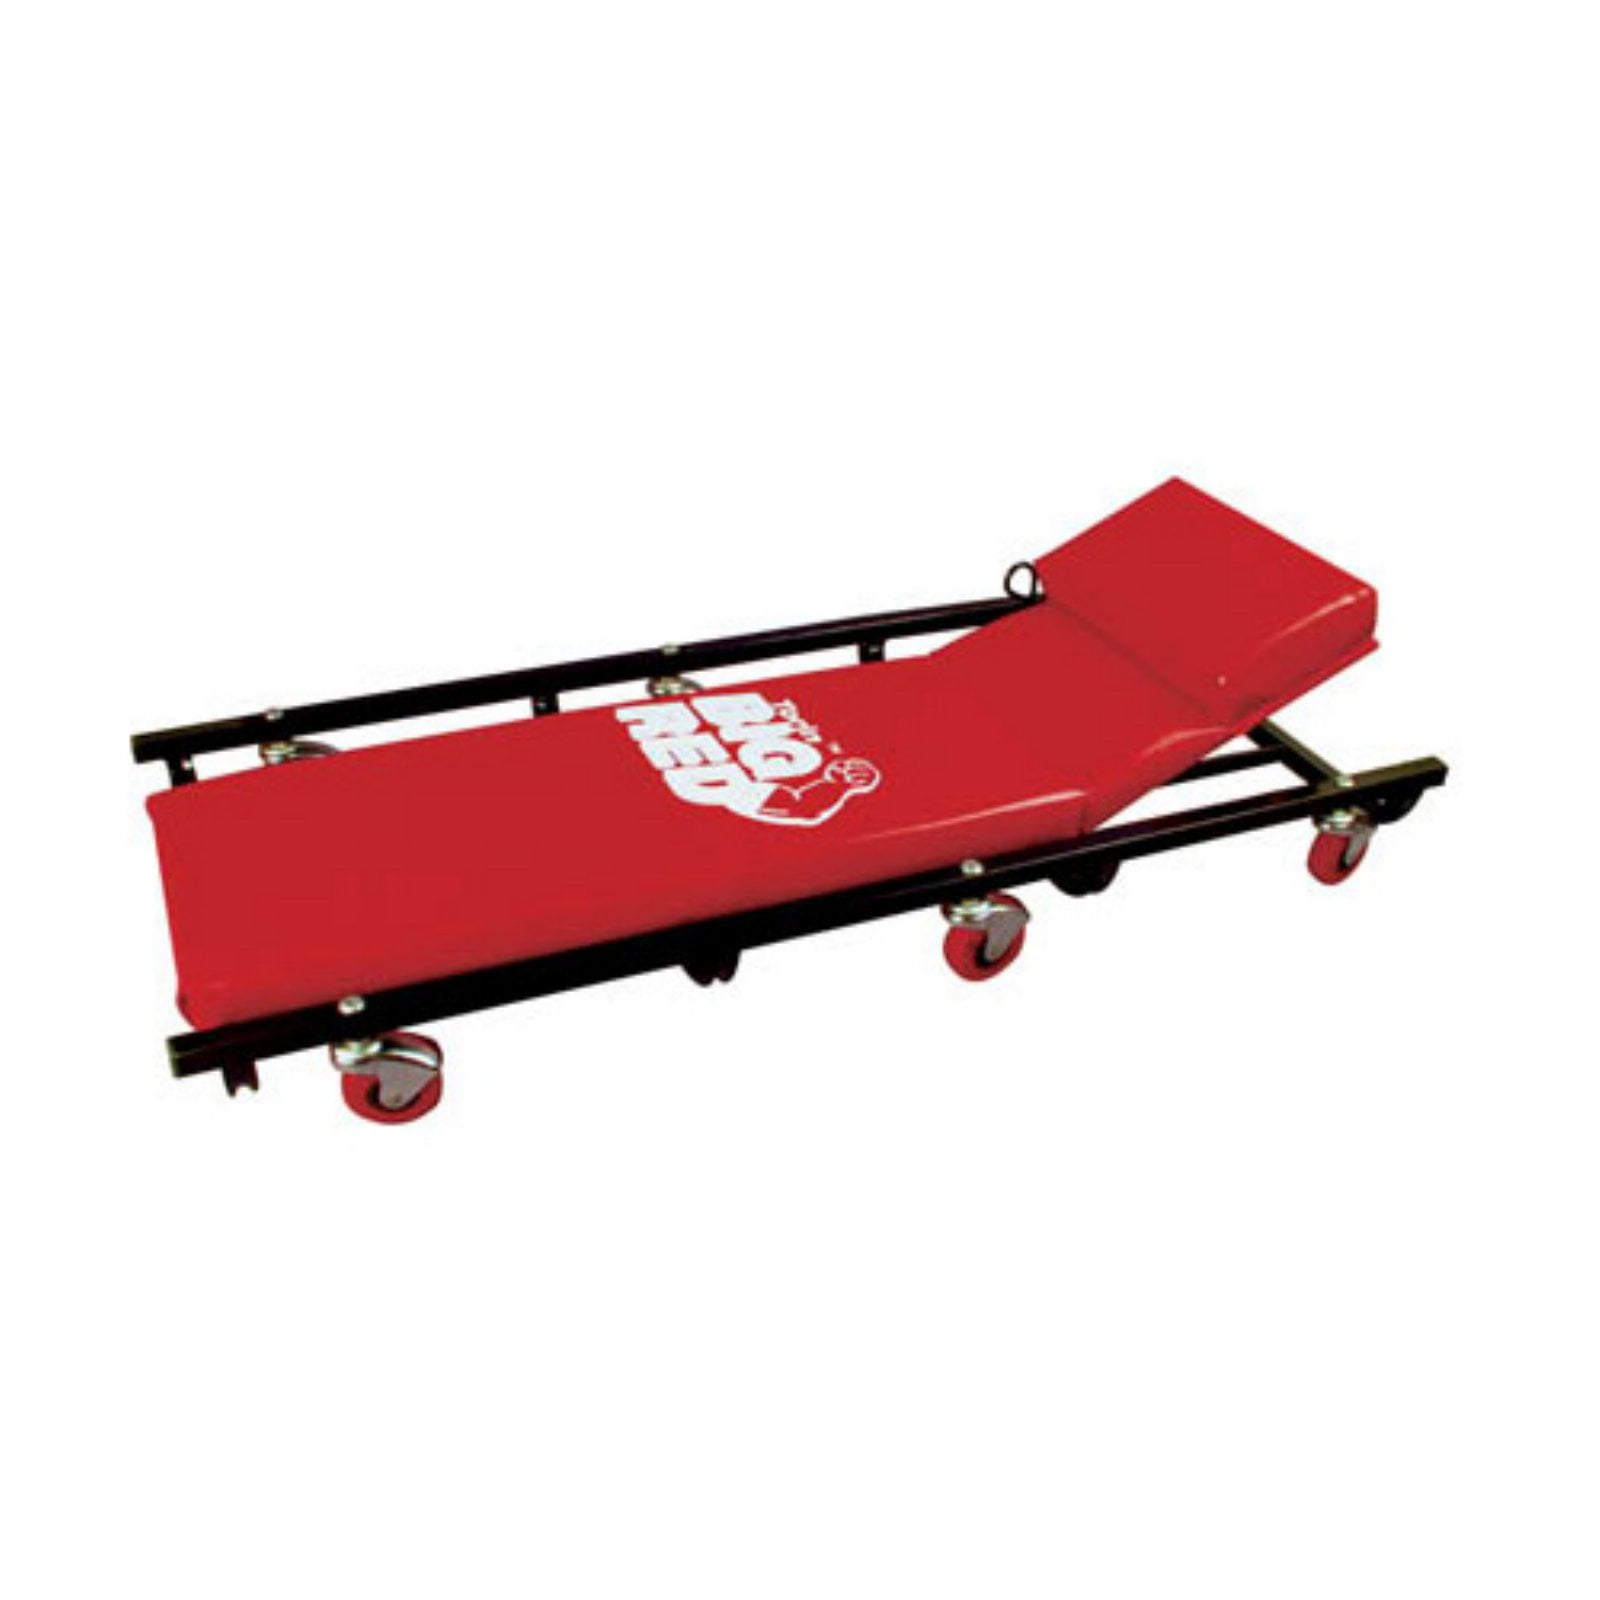 40 Padded Mechanic Cart with Adjustable Headrest and 6 Casters Black Torin ATR6452B Rolling Garage/Shop Creeper 